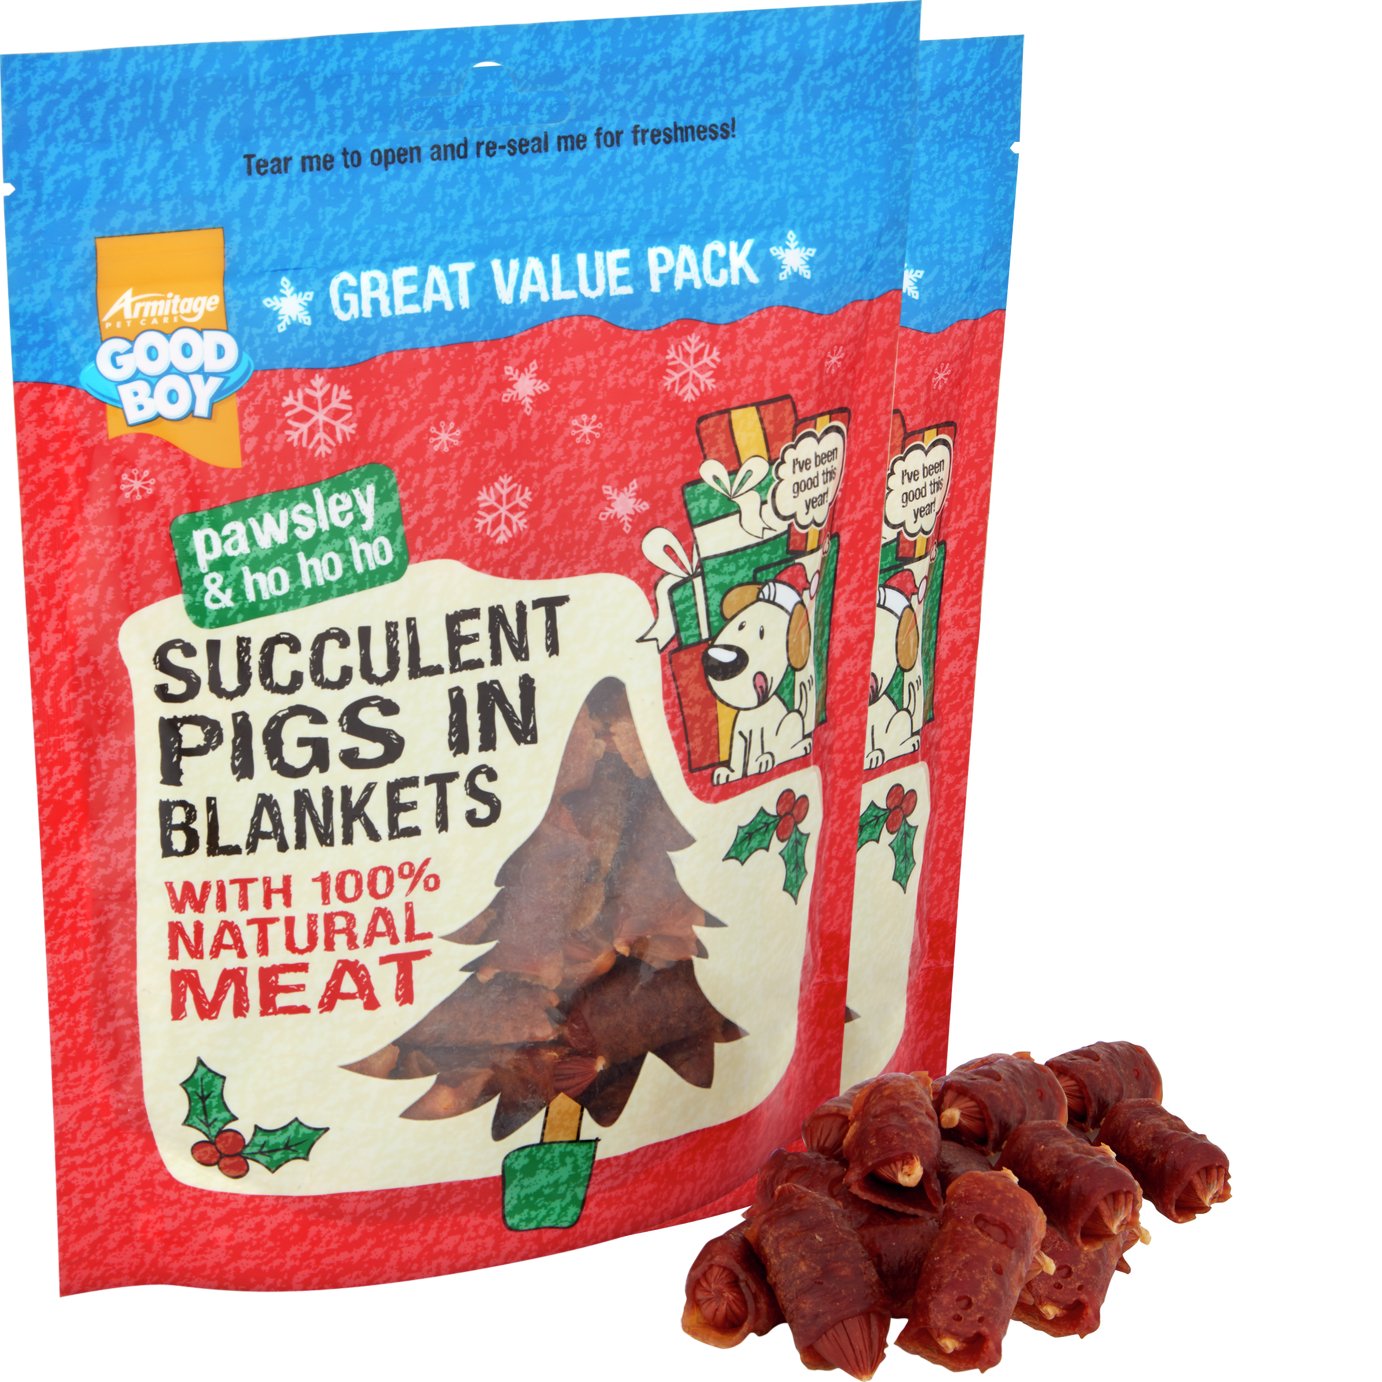 Good Boy Pigs in Blankets - Pack of 3